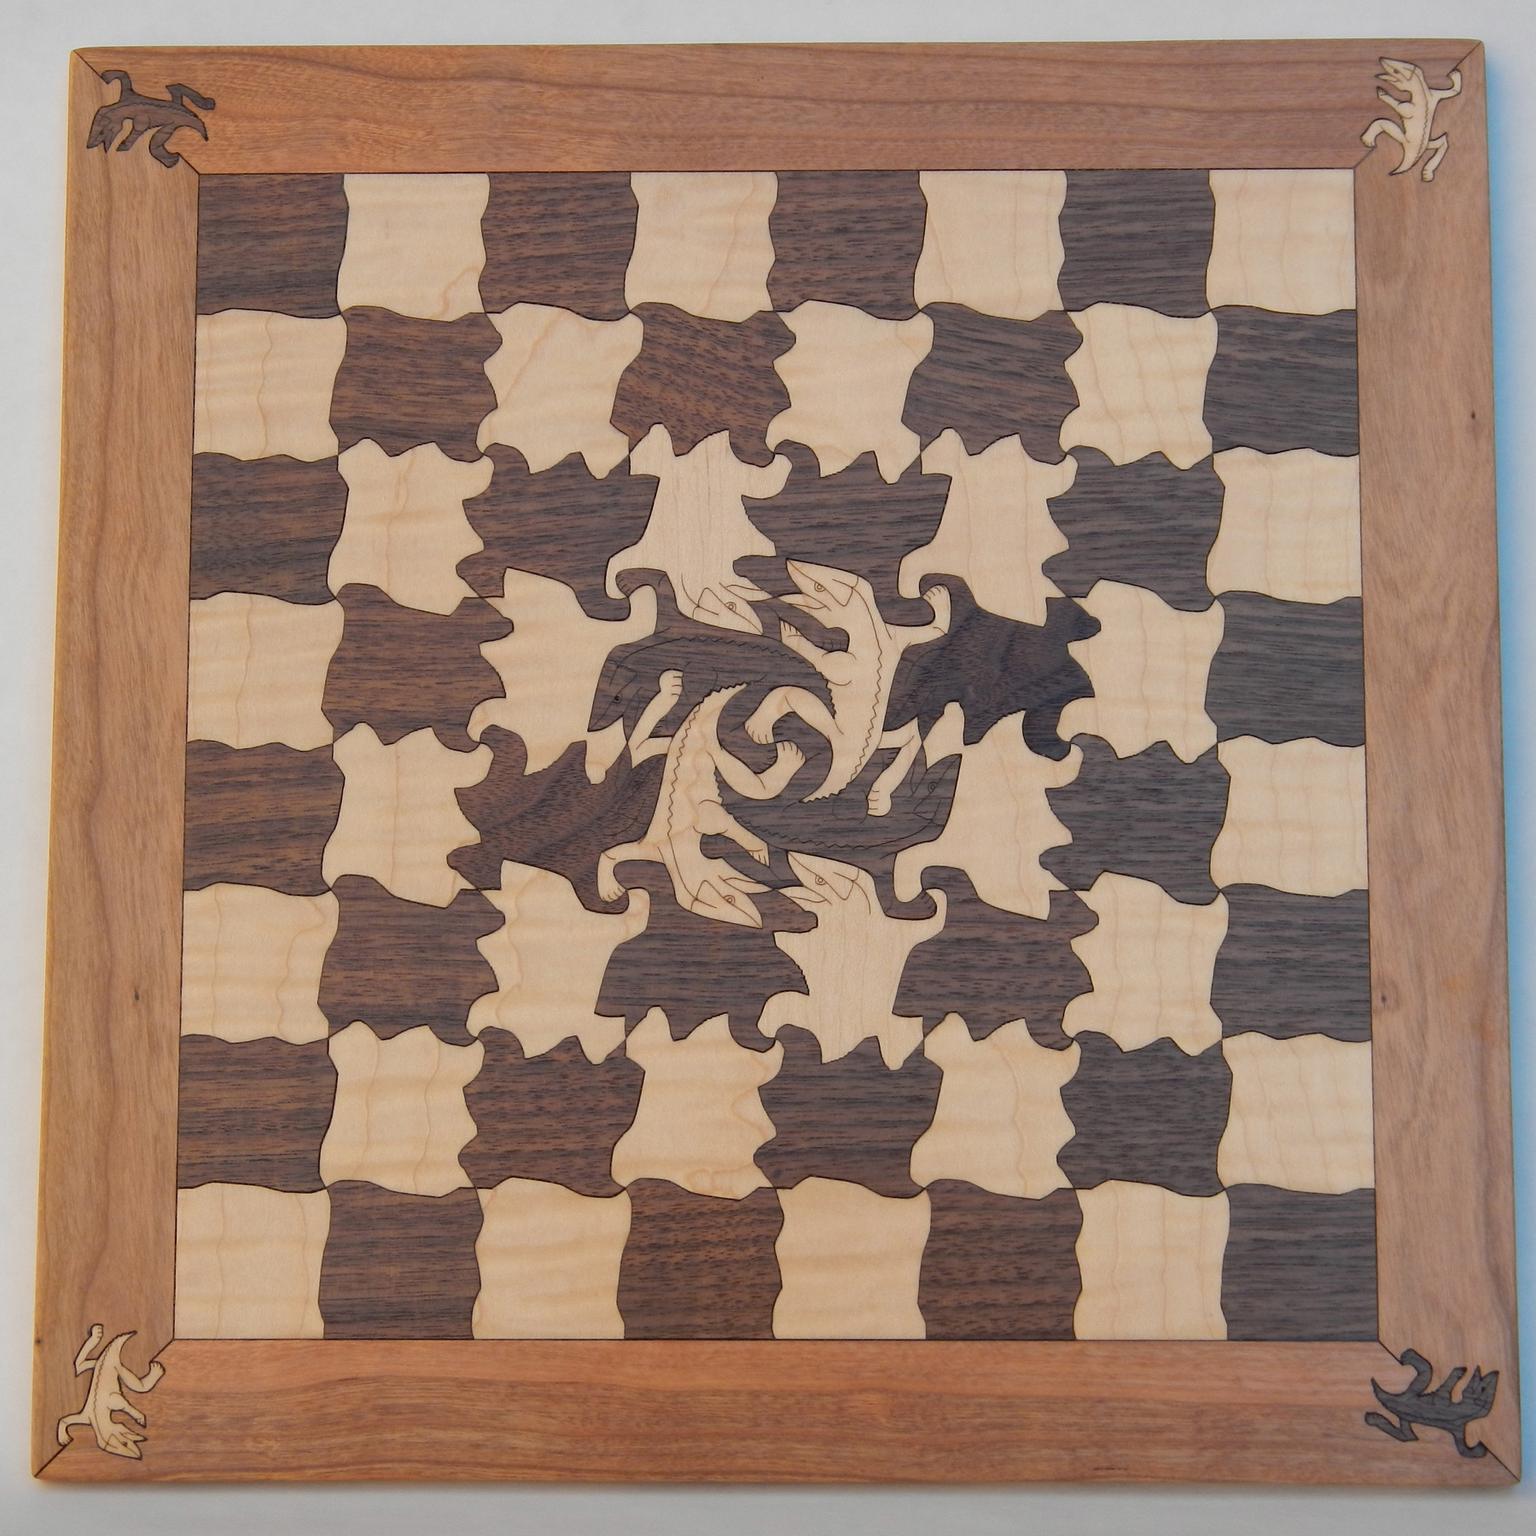 Image for entry 'Inlaid Wood Chessboard inspired by M.C. Escher’s Development I'